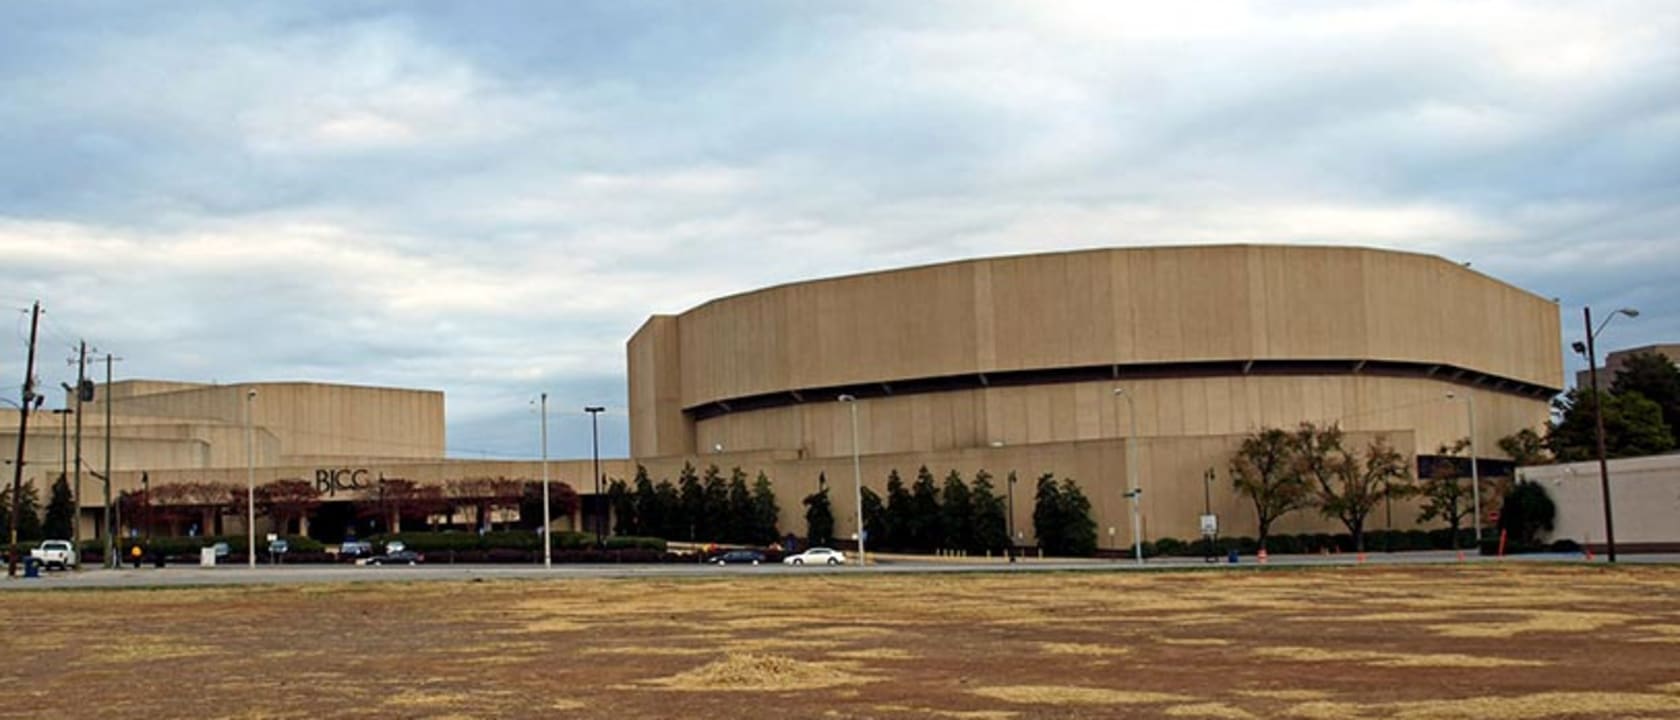 Legacy Arena at The BJCC